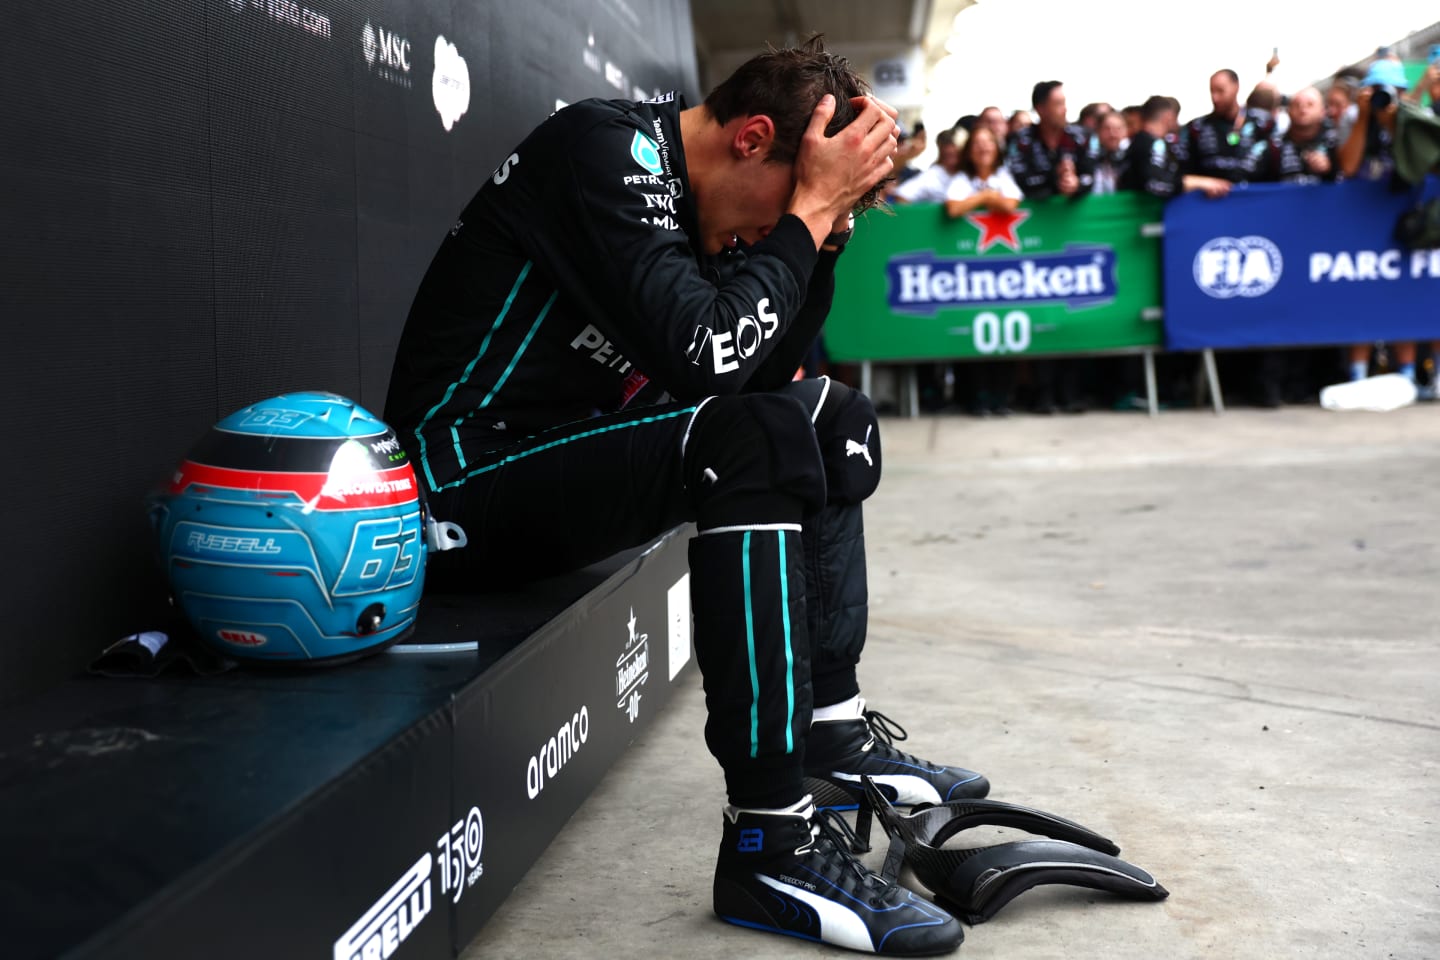 SAO PAULO, BRAZIL - NOVEMBER 13: Race winner George Russell of Great Britain and Mercedes reacts in parc ferme during the F1 Grand Prix of Brazil at Autodromo Jose Carlos Pace on November 13, 2022 in Sao Paulo, Brazil. (Photo by Dan Istitene - Formula 1/Formula 1 via Getty Images)